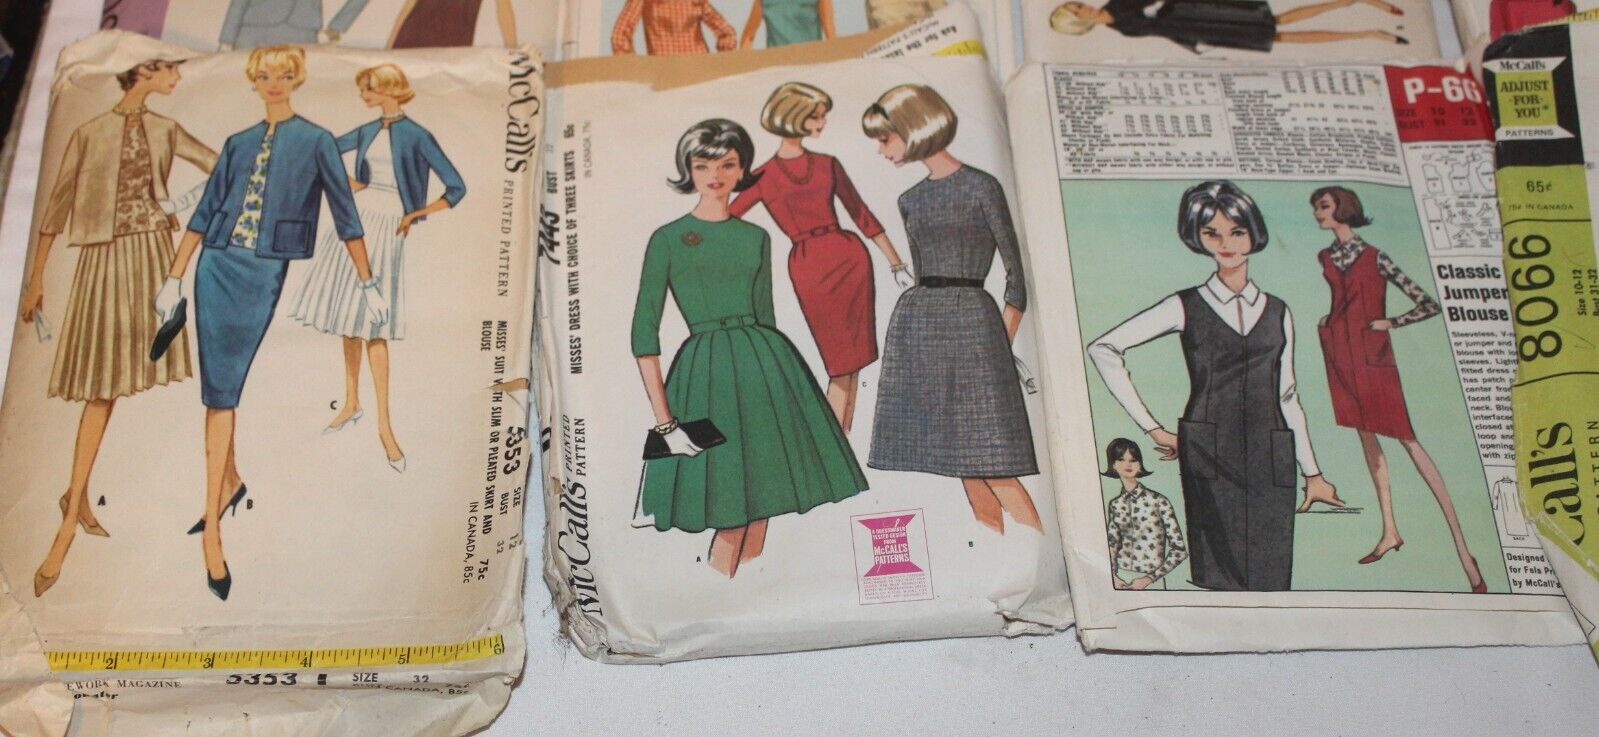 12 Vtg 1960\'s/70s Sewing Pattern Lot Women\'s Clothing Sz 12 Butterick McCall\'s